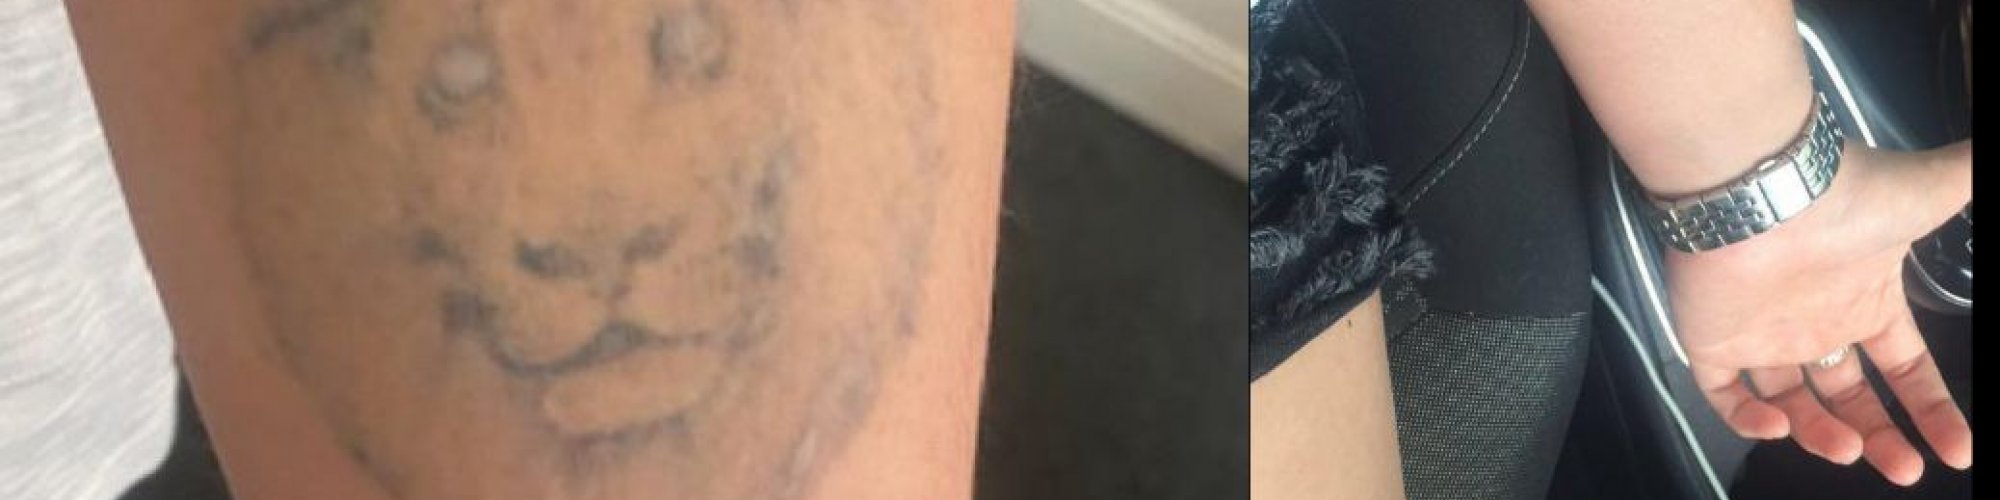 Tattoo Removal Manchester